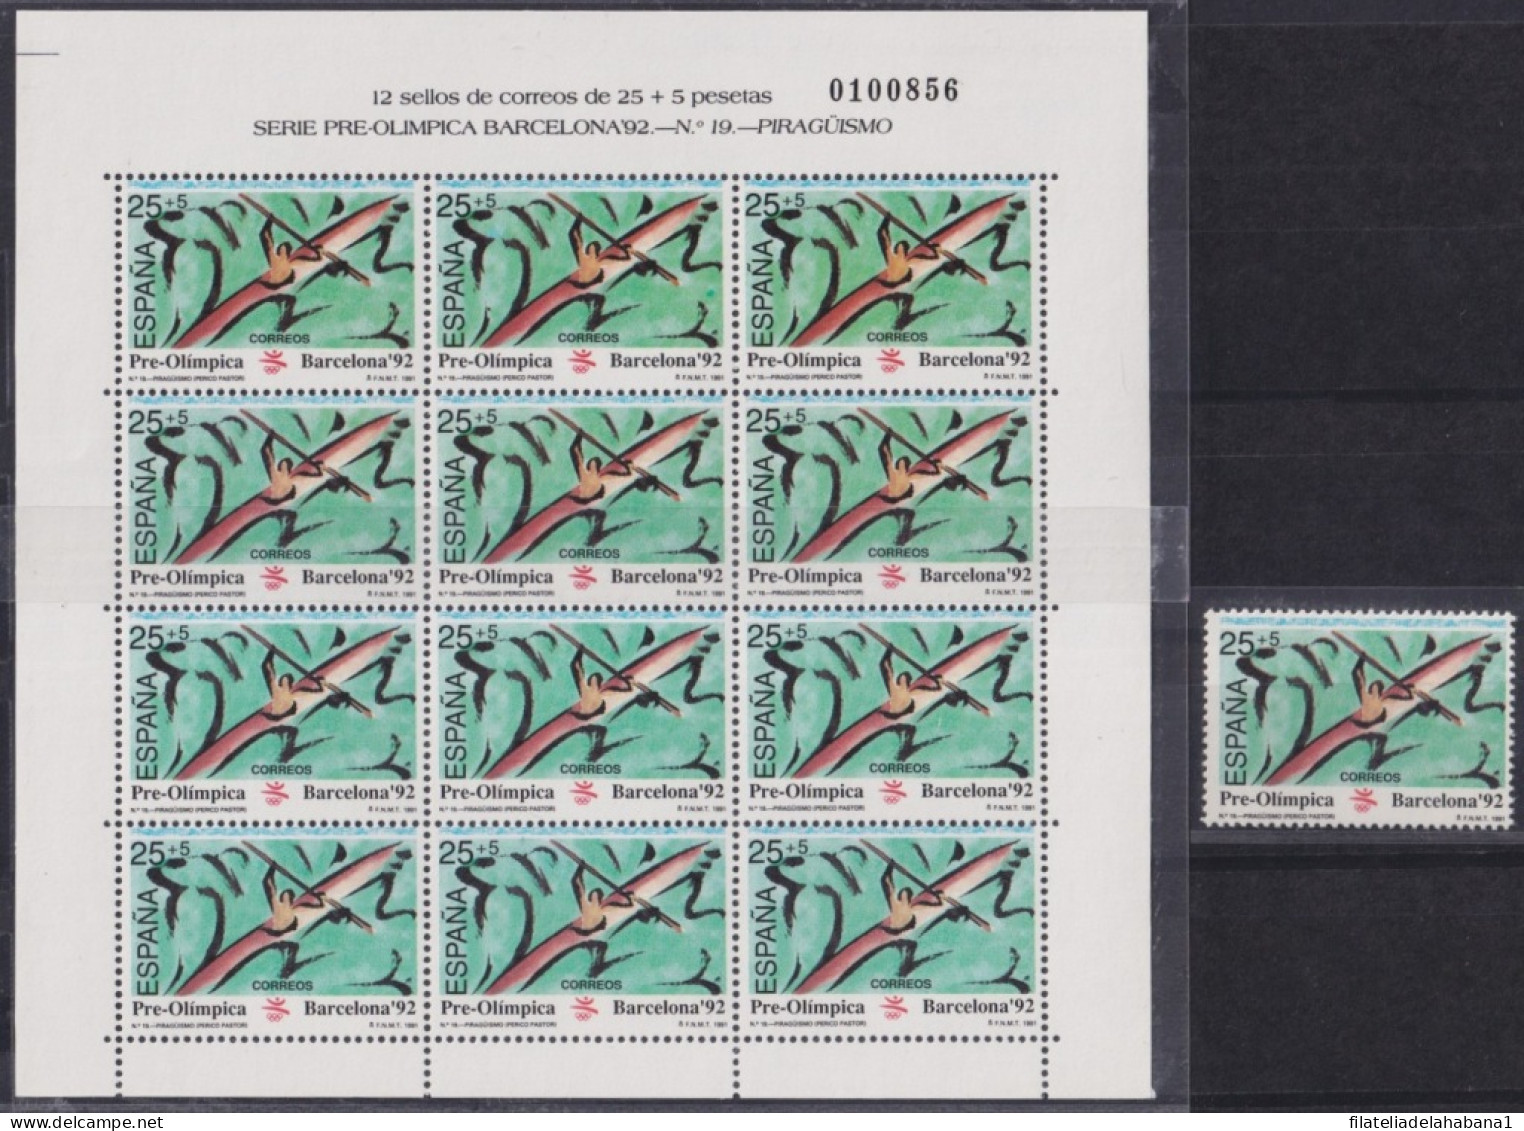 F-EX49325 SPAIN ESPAÑA MNH 1991 OLYMPIC GAMES BARCELONA CANOES PIRAGUISMO SHEET.  - Sommer 1992: Barcelone